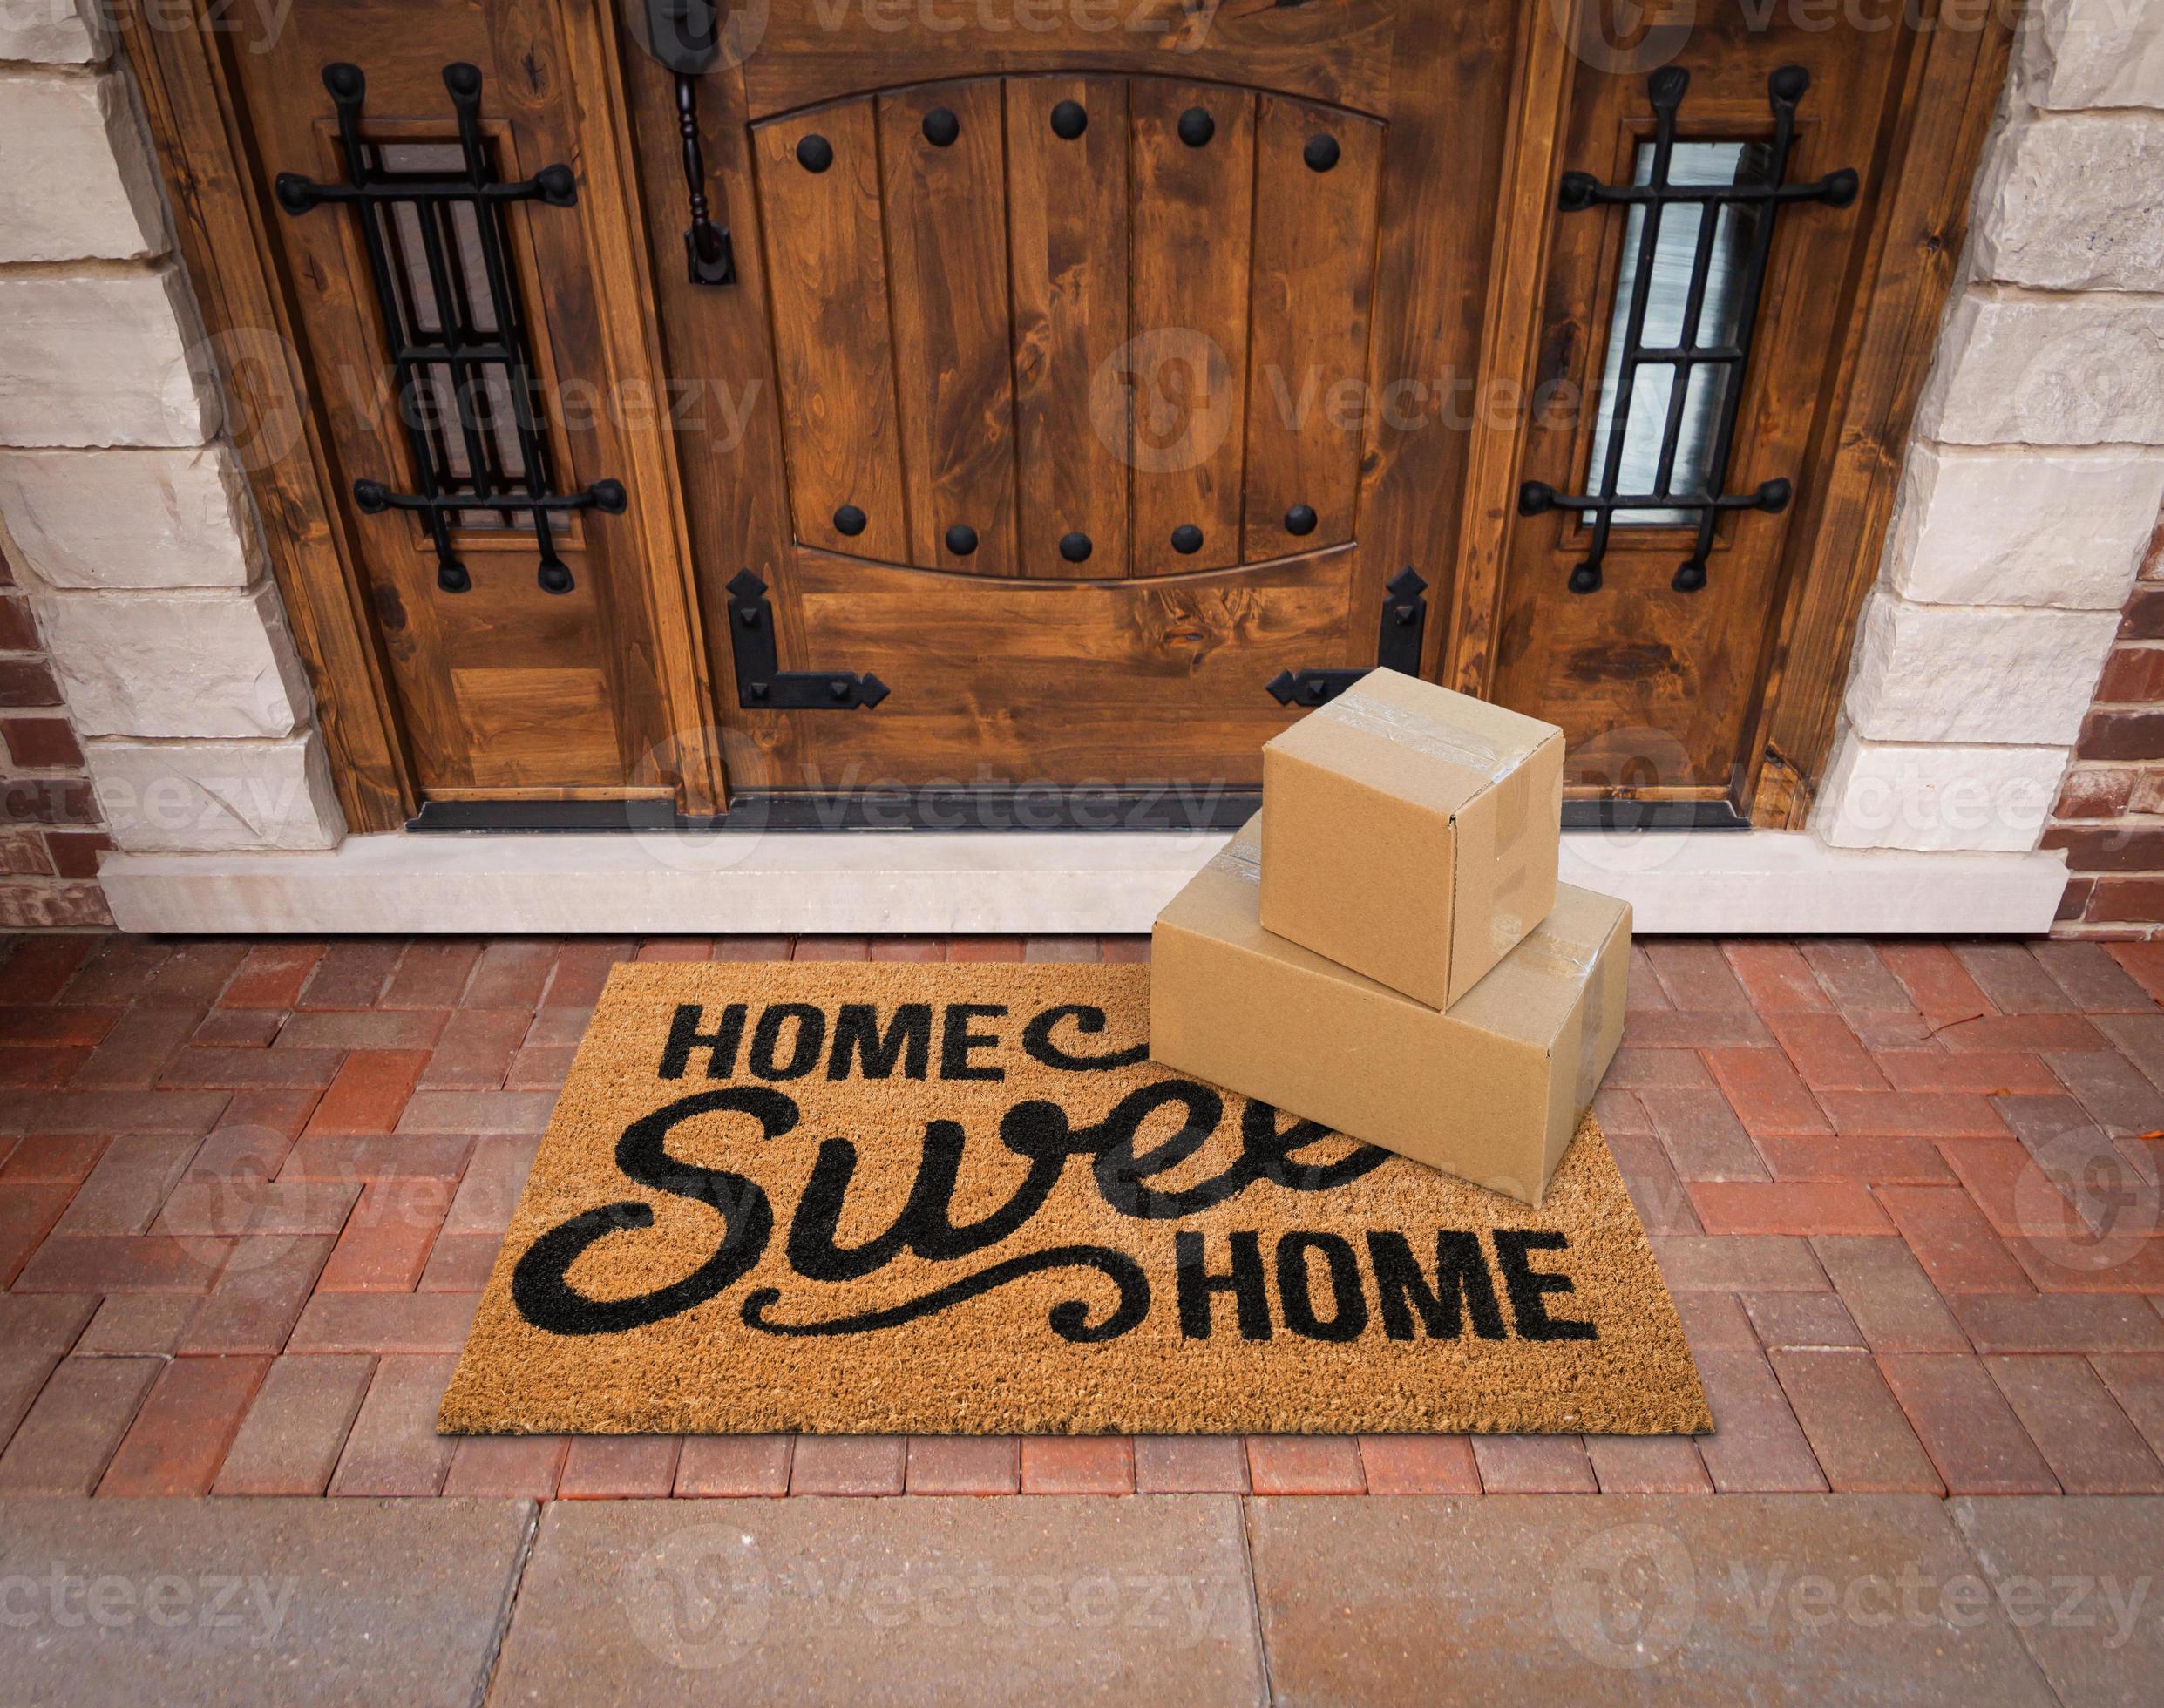 https://static.vecteezy.com/system/resources/previews/016/358/547/large_2x/small-packages-sitting-on-home-sweet-home-welcome-mat-at-front-door-of-house-photo.jpg